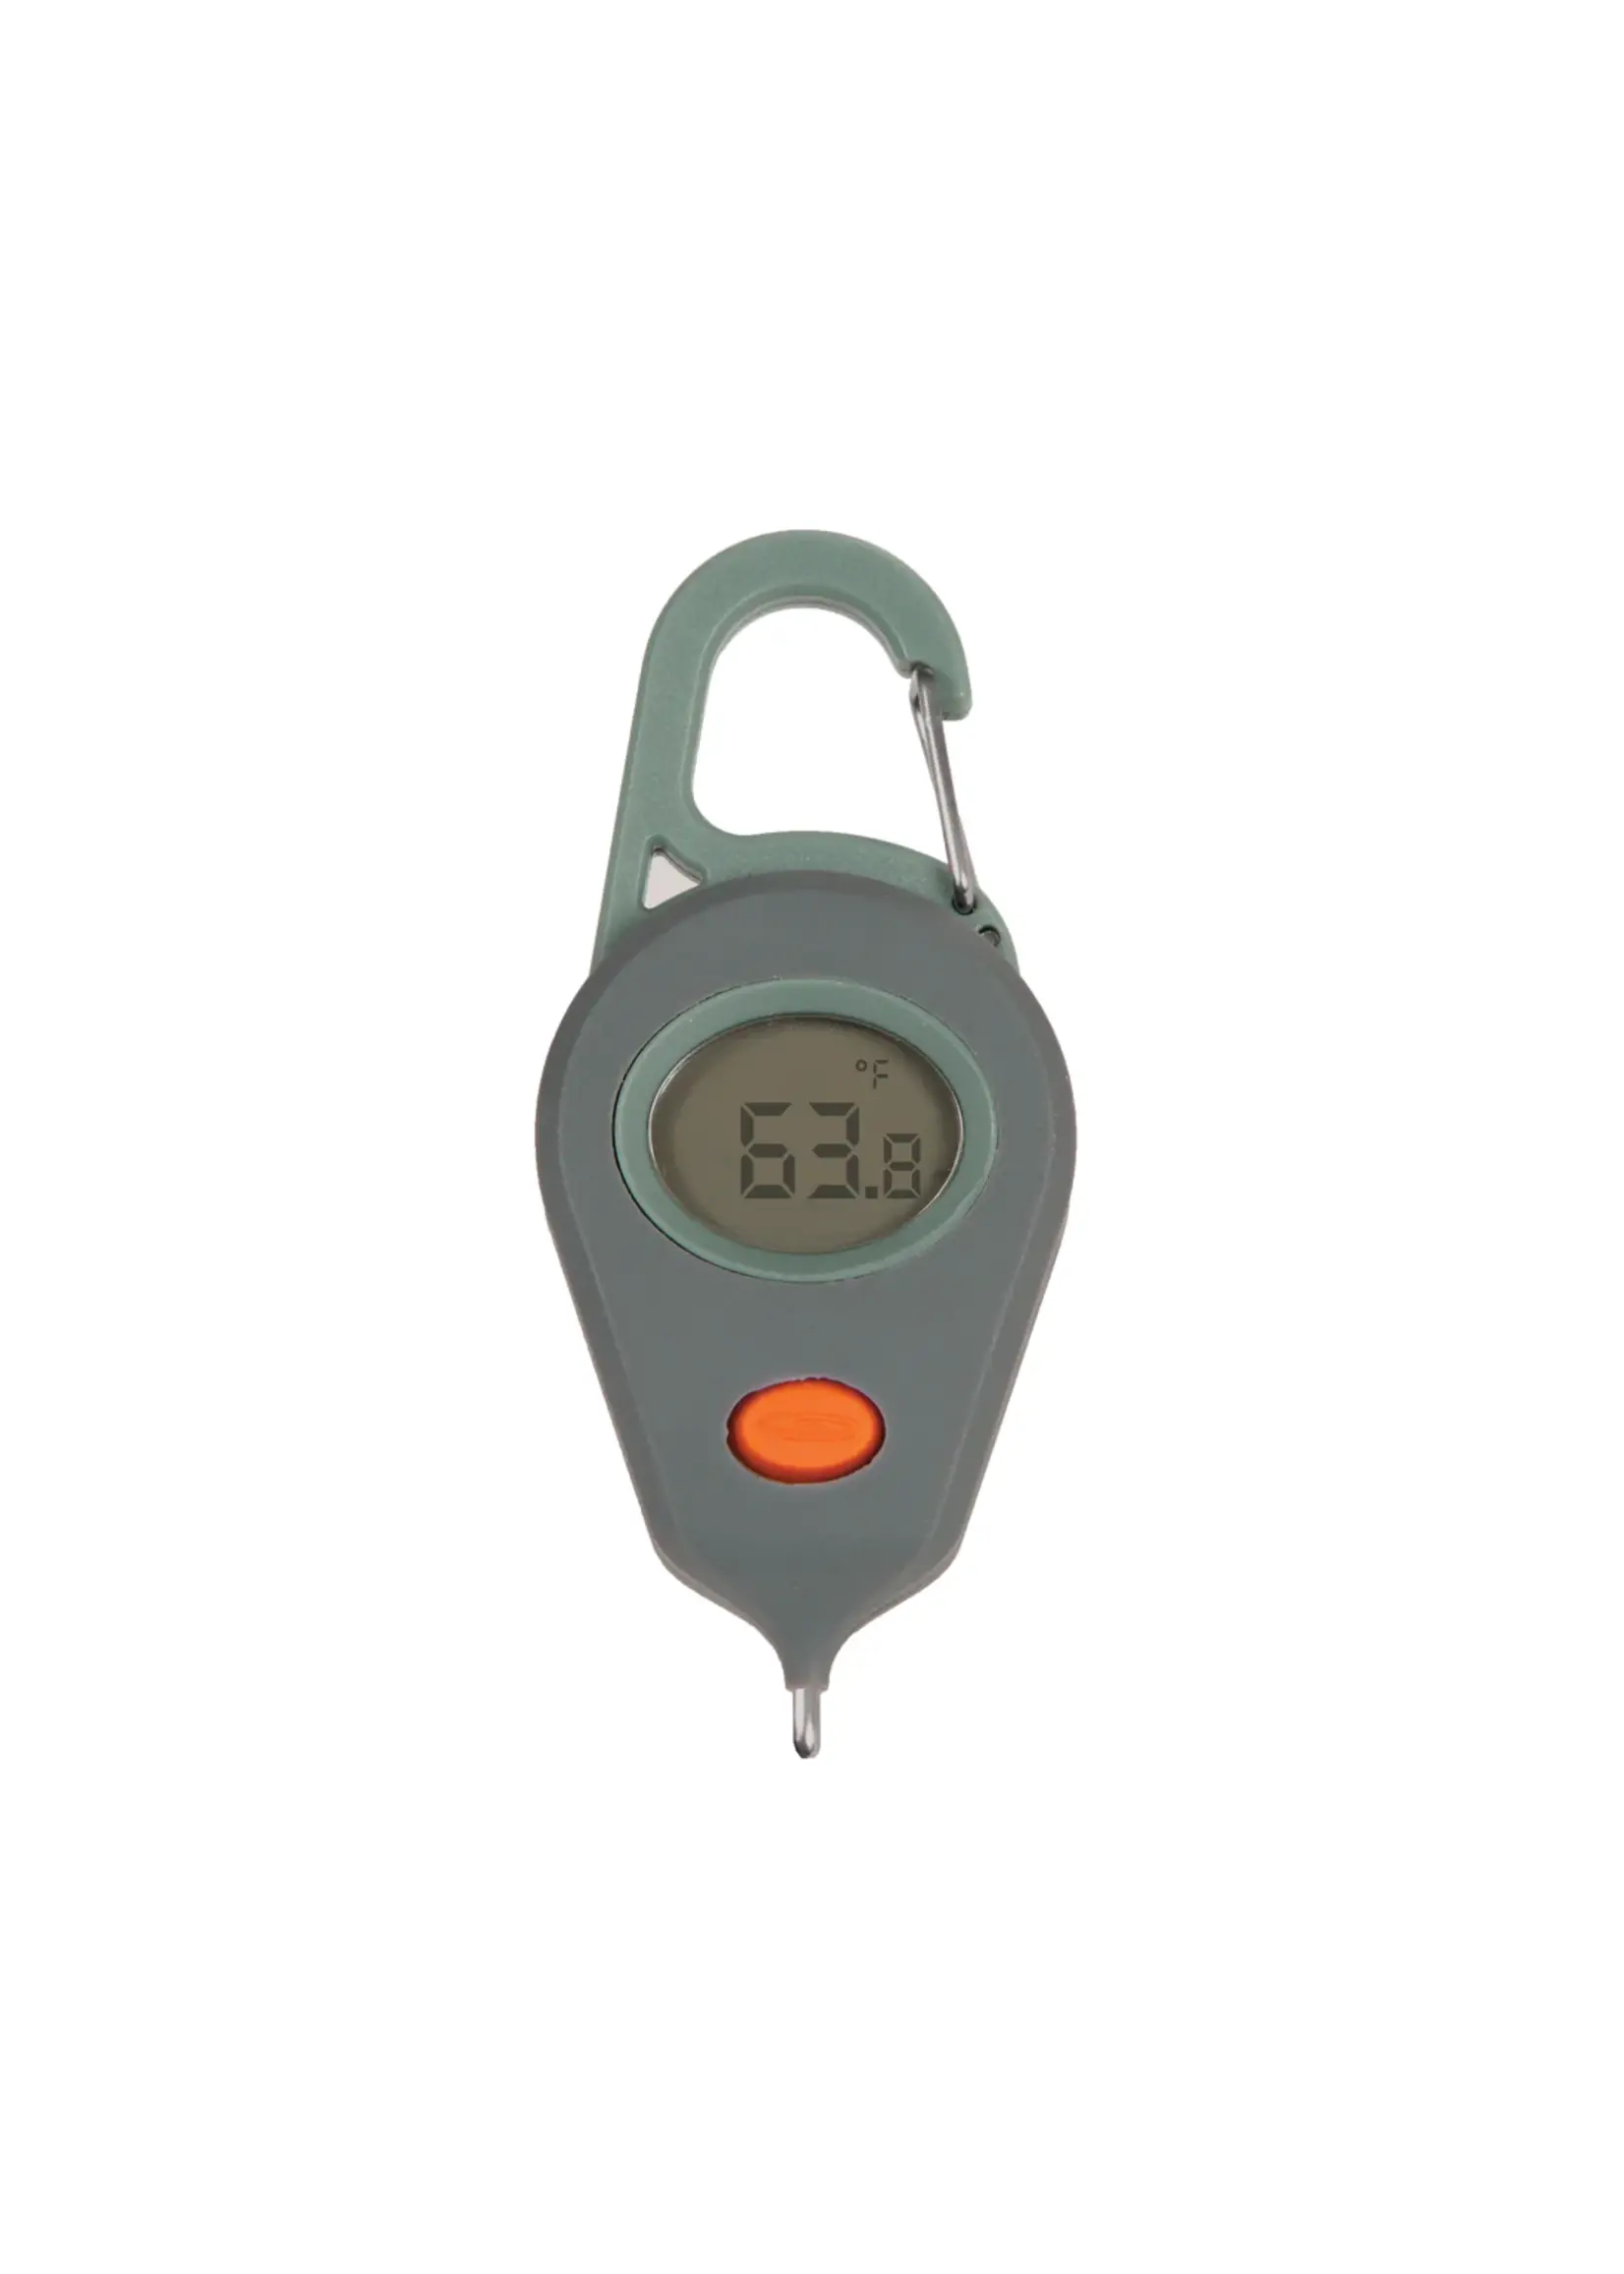 Fishpond Riverkeeper Digital Thermometer Review 